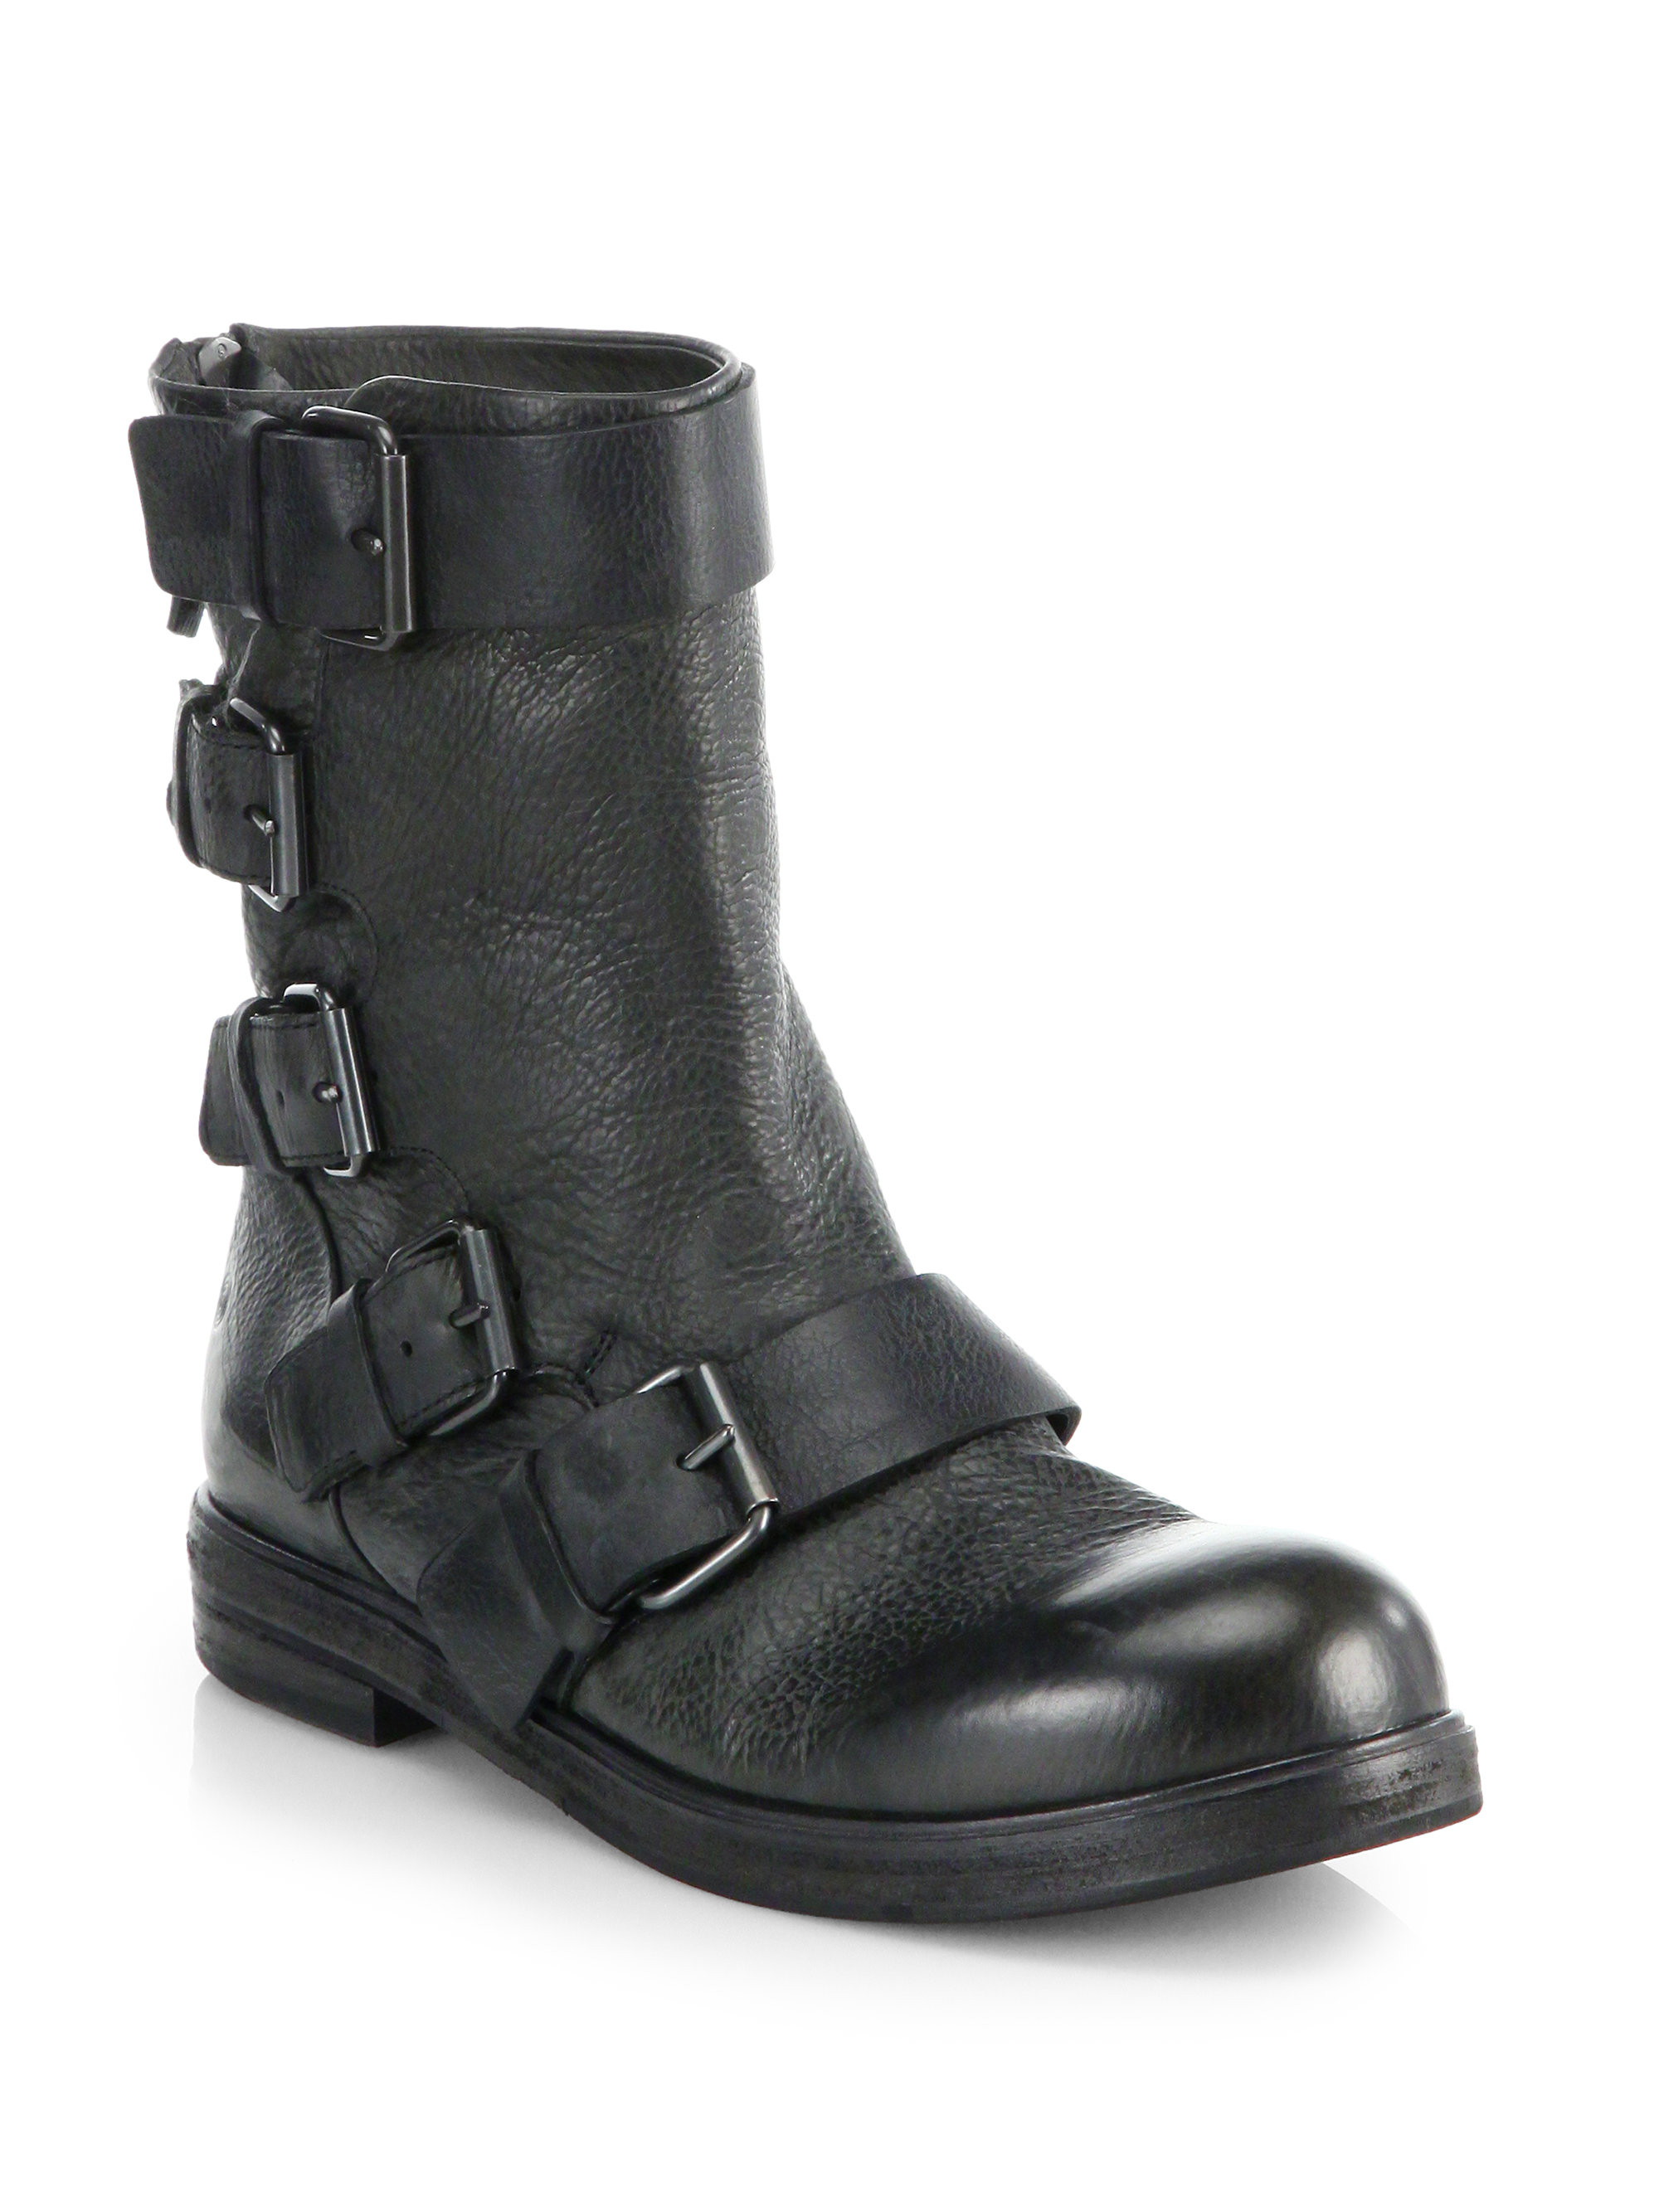 Marsell Buckled Leather MidCalf Moto Boots in Black Lyst